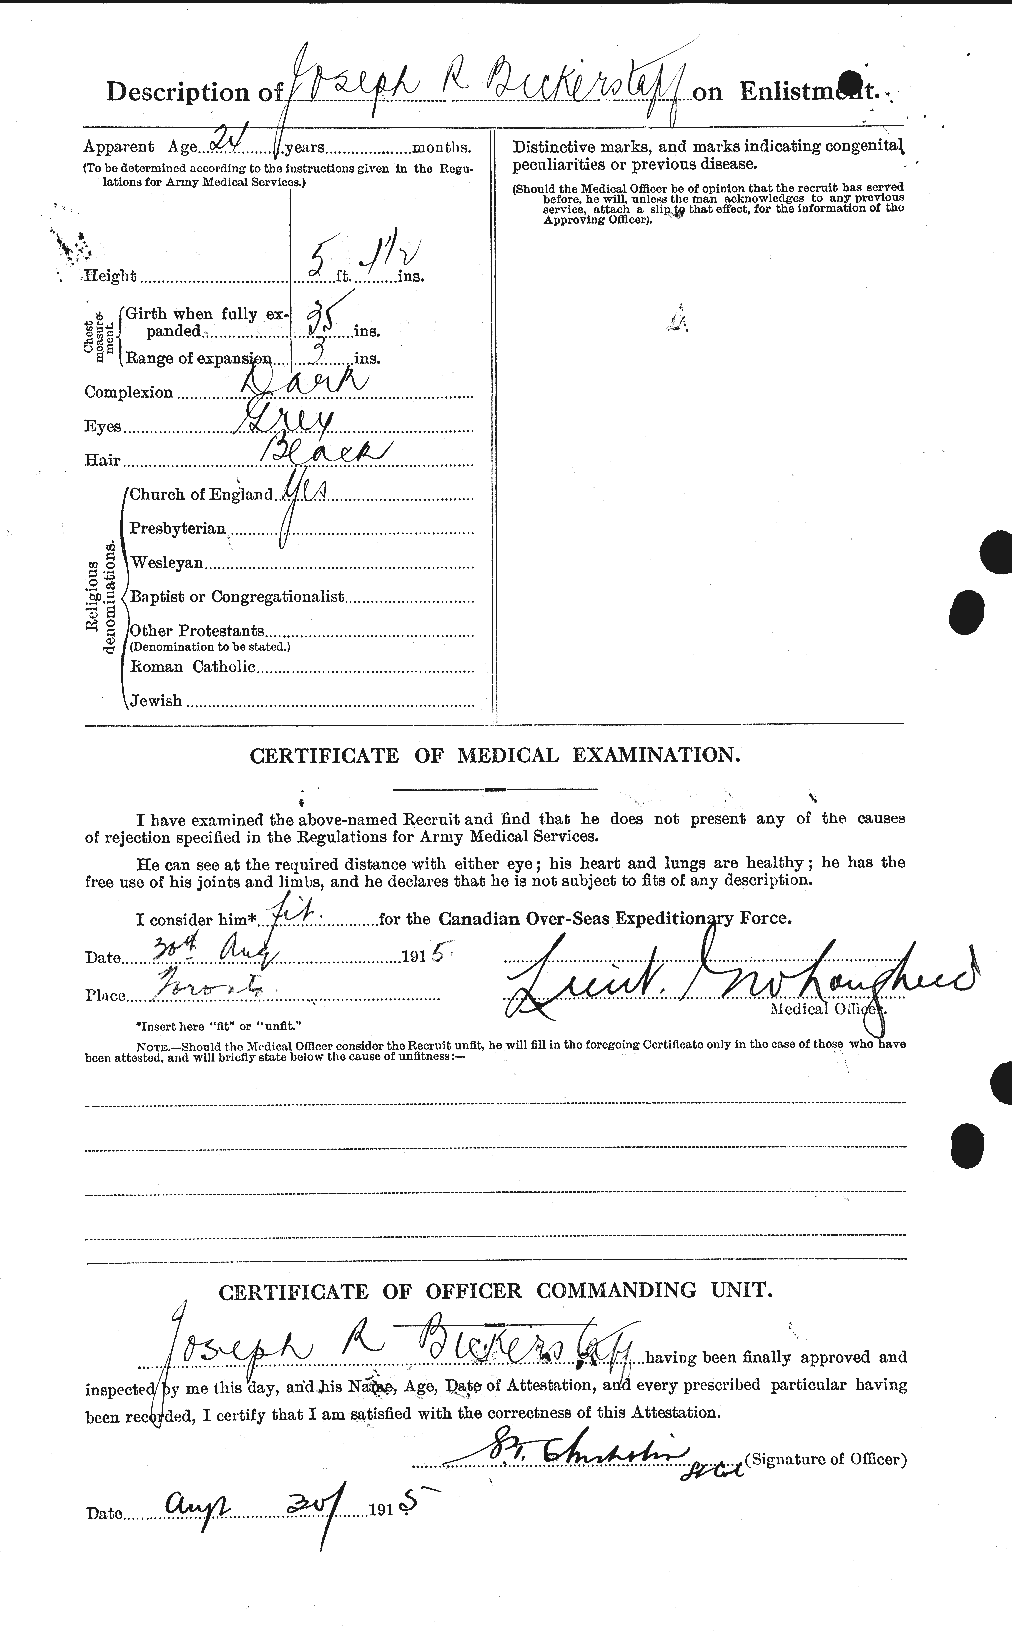 Personnel Records of the First World War - CEF 244949b